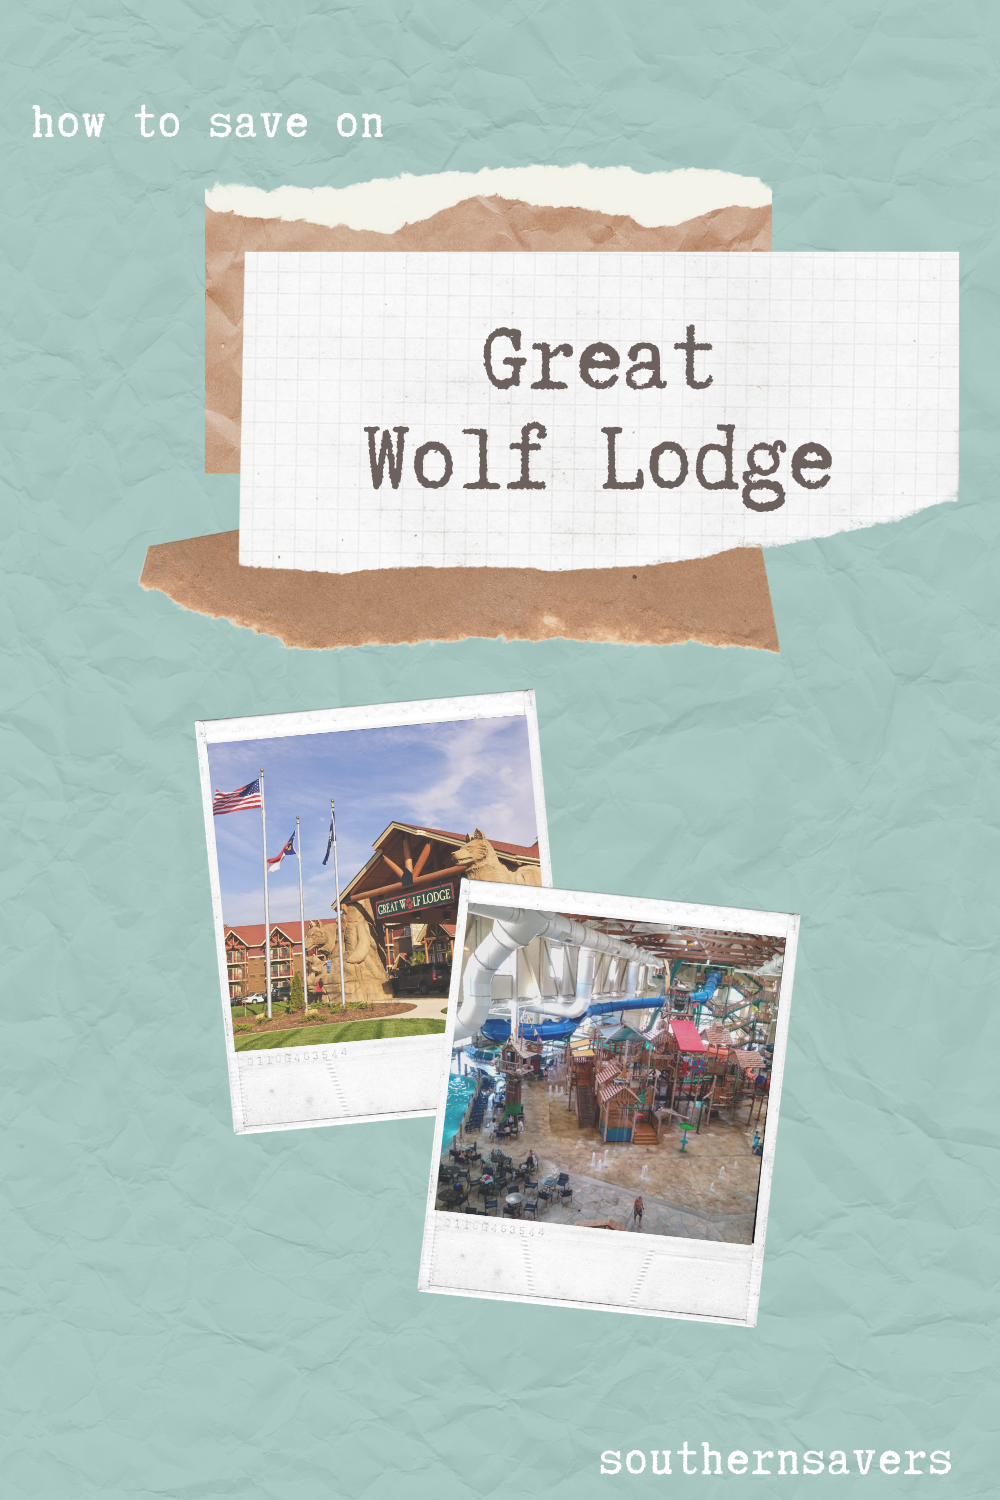 Everything you need to know to get the best deal on Great Wolf Lodge!